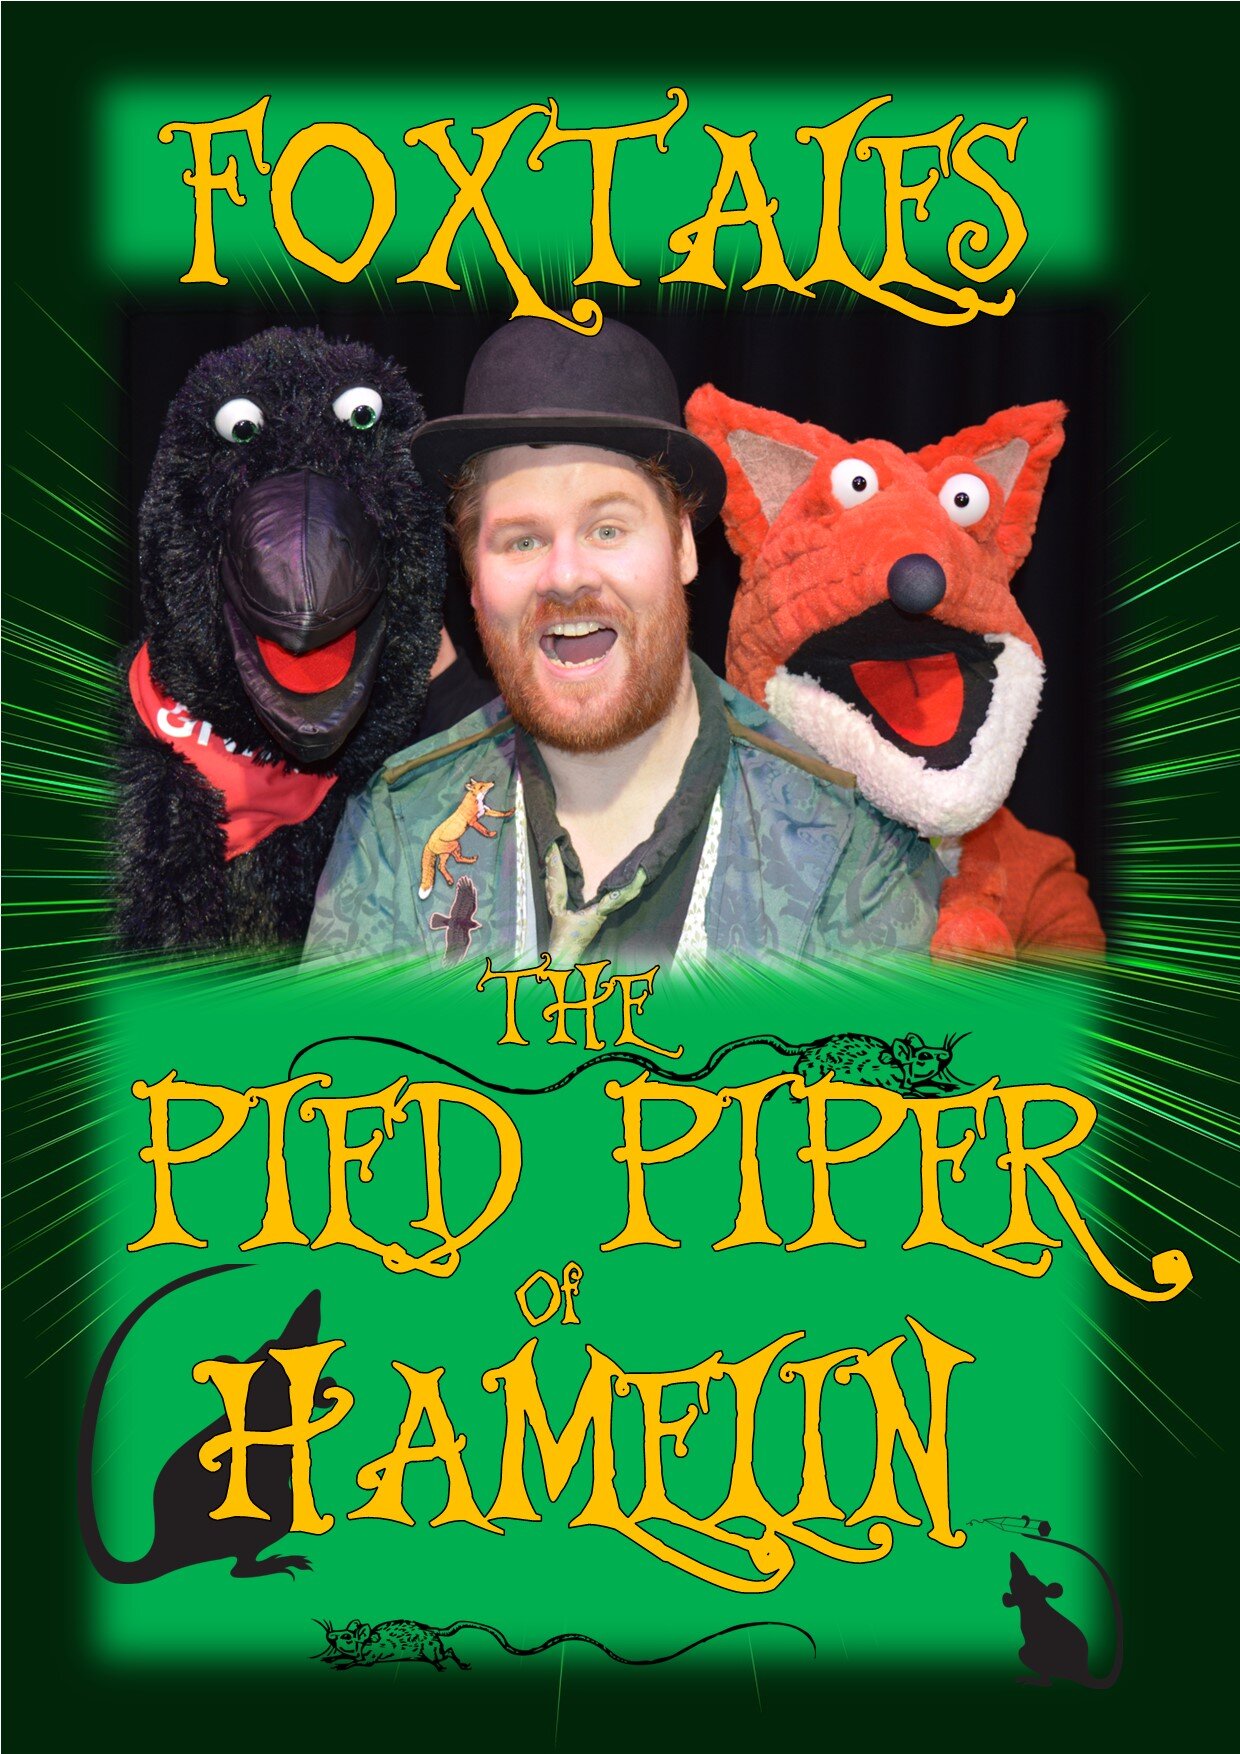 Fox Tales Pied Piper Picture .jpg